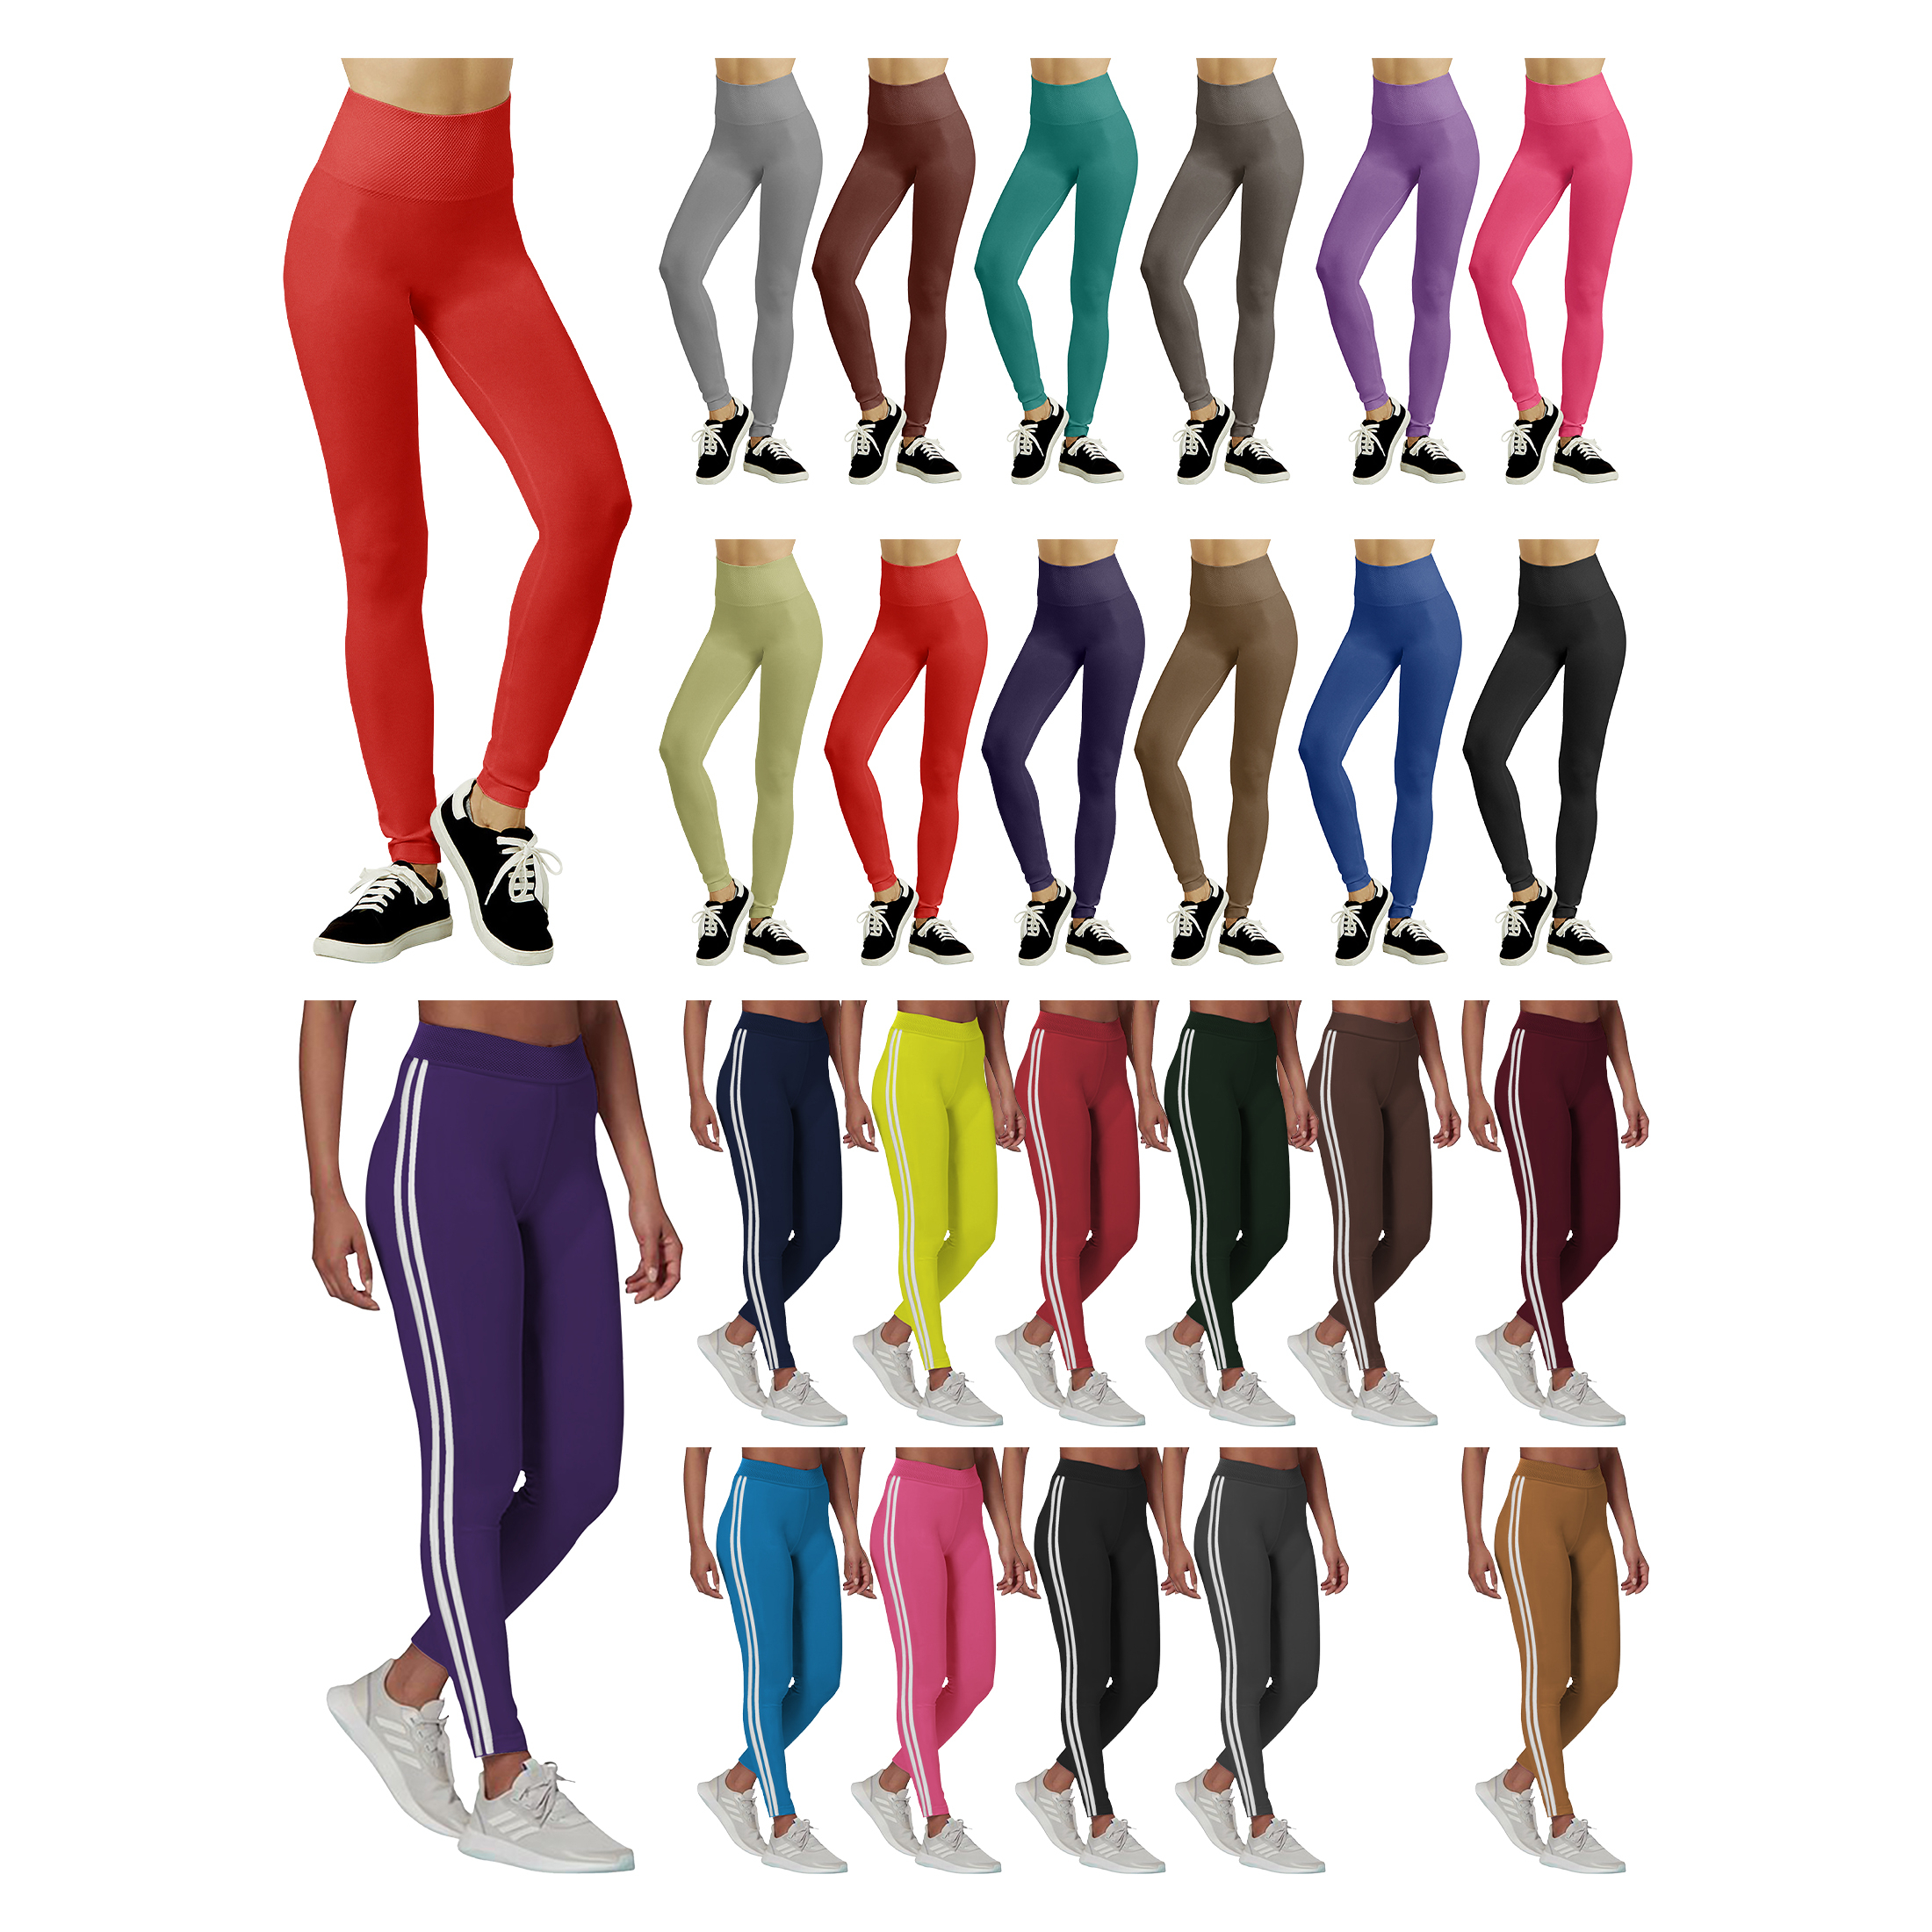 5-Pack Women's Fleece-Lined High Waisted Workout Yoga Leggings - Solid & Stripes, S/M